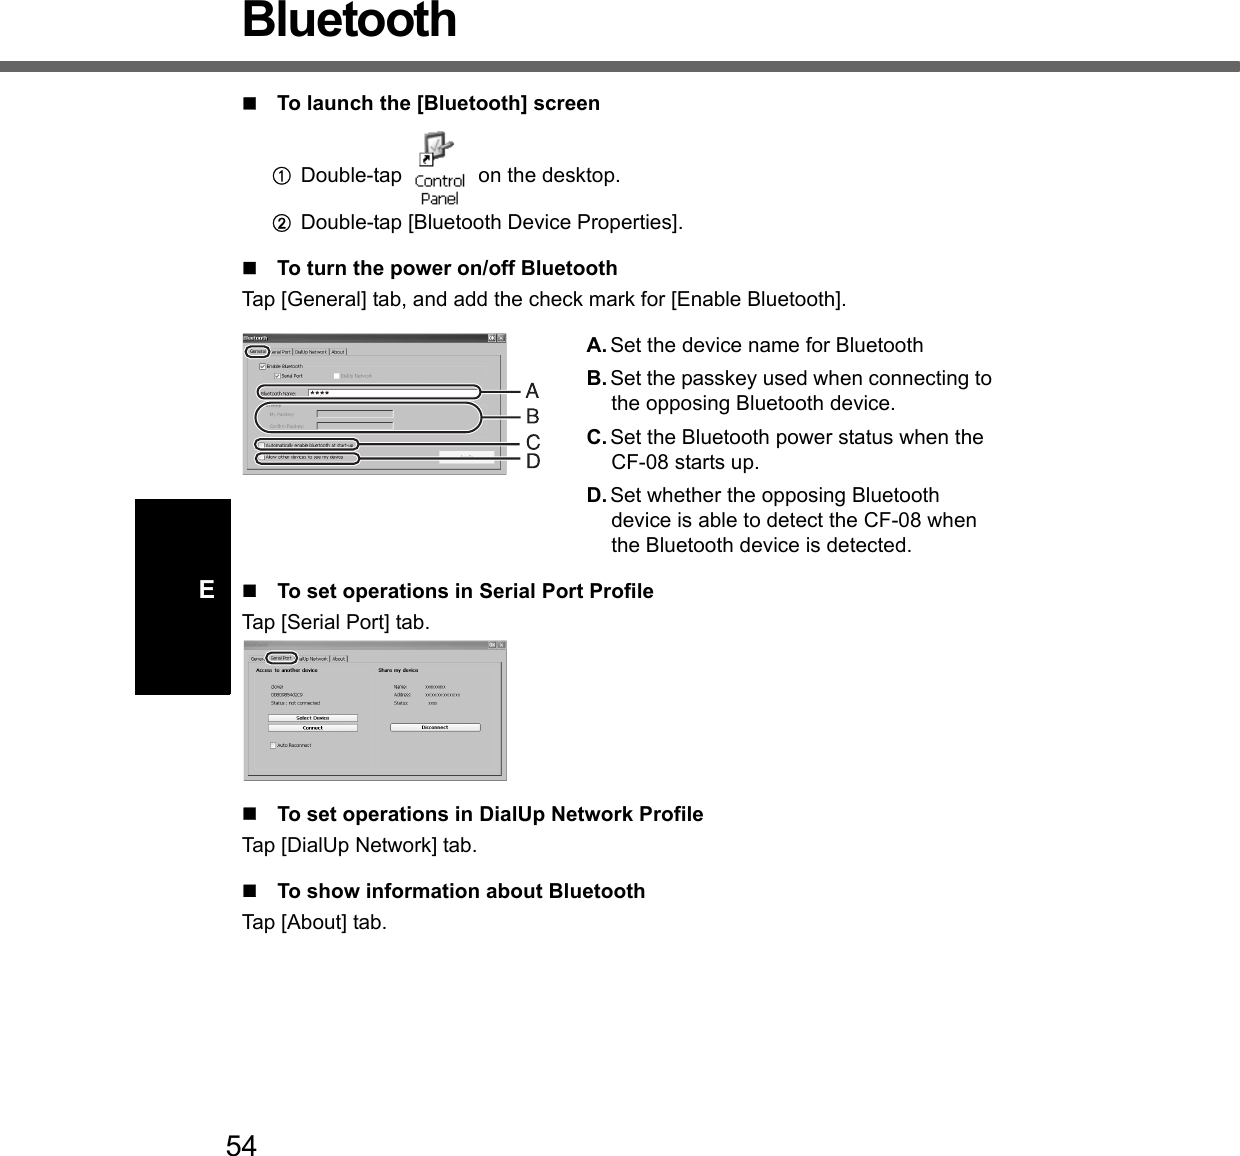 54EBluetoothTo launch the [Bluetooth] screenADouble-tap   on the desktop.BDouble-tap [Bluetooth Device Properties].To turn the power on/off BluetoothTap [General] tab, and add the check mark for [Enable Bluetooth].A. Set the device name for BluetoothB. Set the passkey used when connecting to the opposing Bluetooth device. C. Set the Bluetooth power status when the CF-08 starts up.D. Set whether the opposing Bluetooth device is able to detect the CF-08 when the Bluetooth device is detected.To set operations in Serial Port ProfileTap [Serial Port] tab.To set operations in DialUp Network ProfileTap [DialUp Network] tab.To show information about BluetoothTap [About] tab.